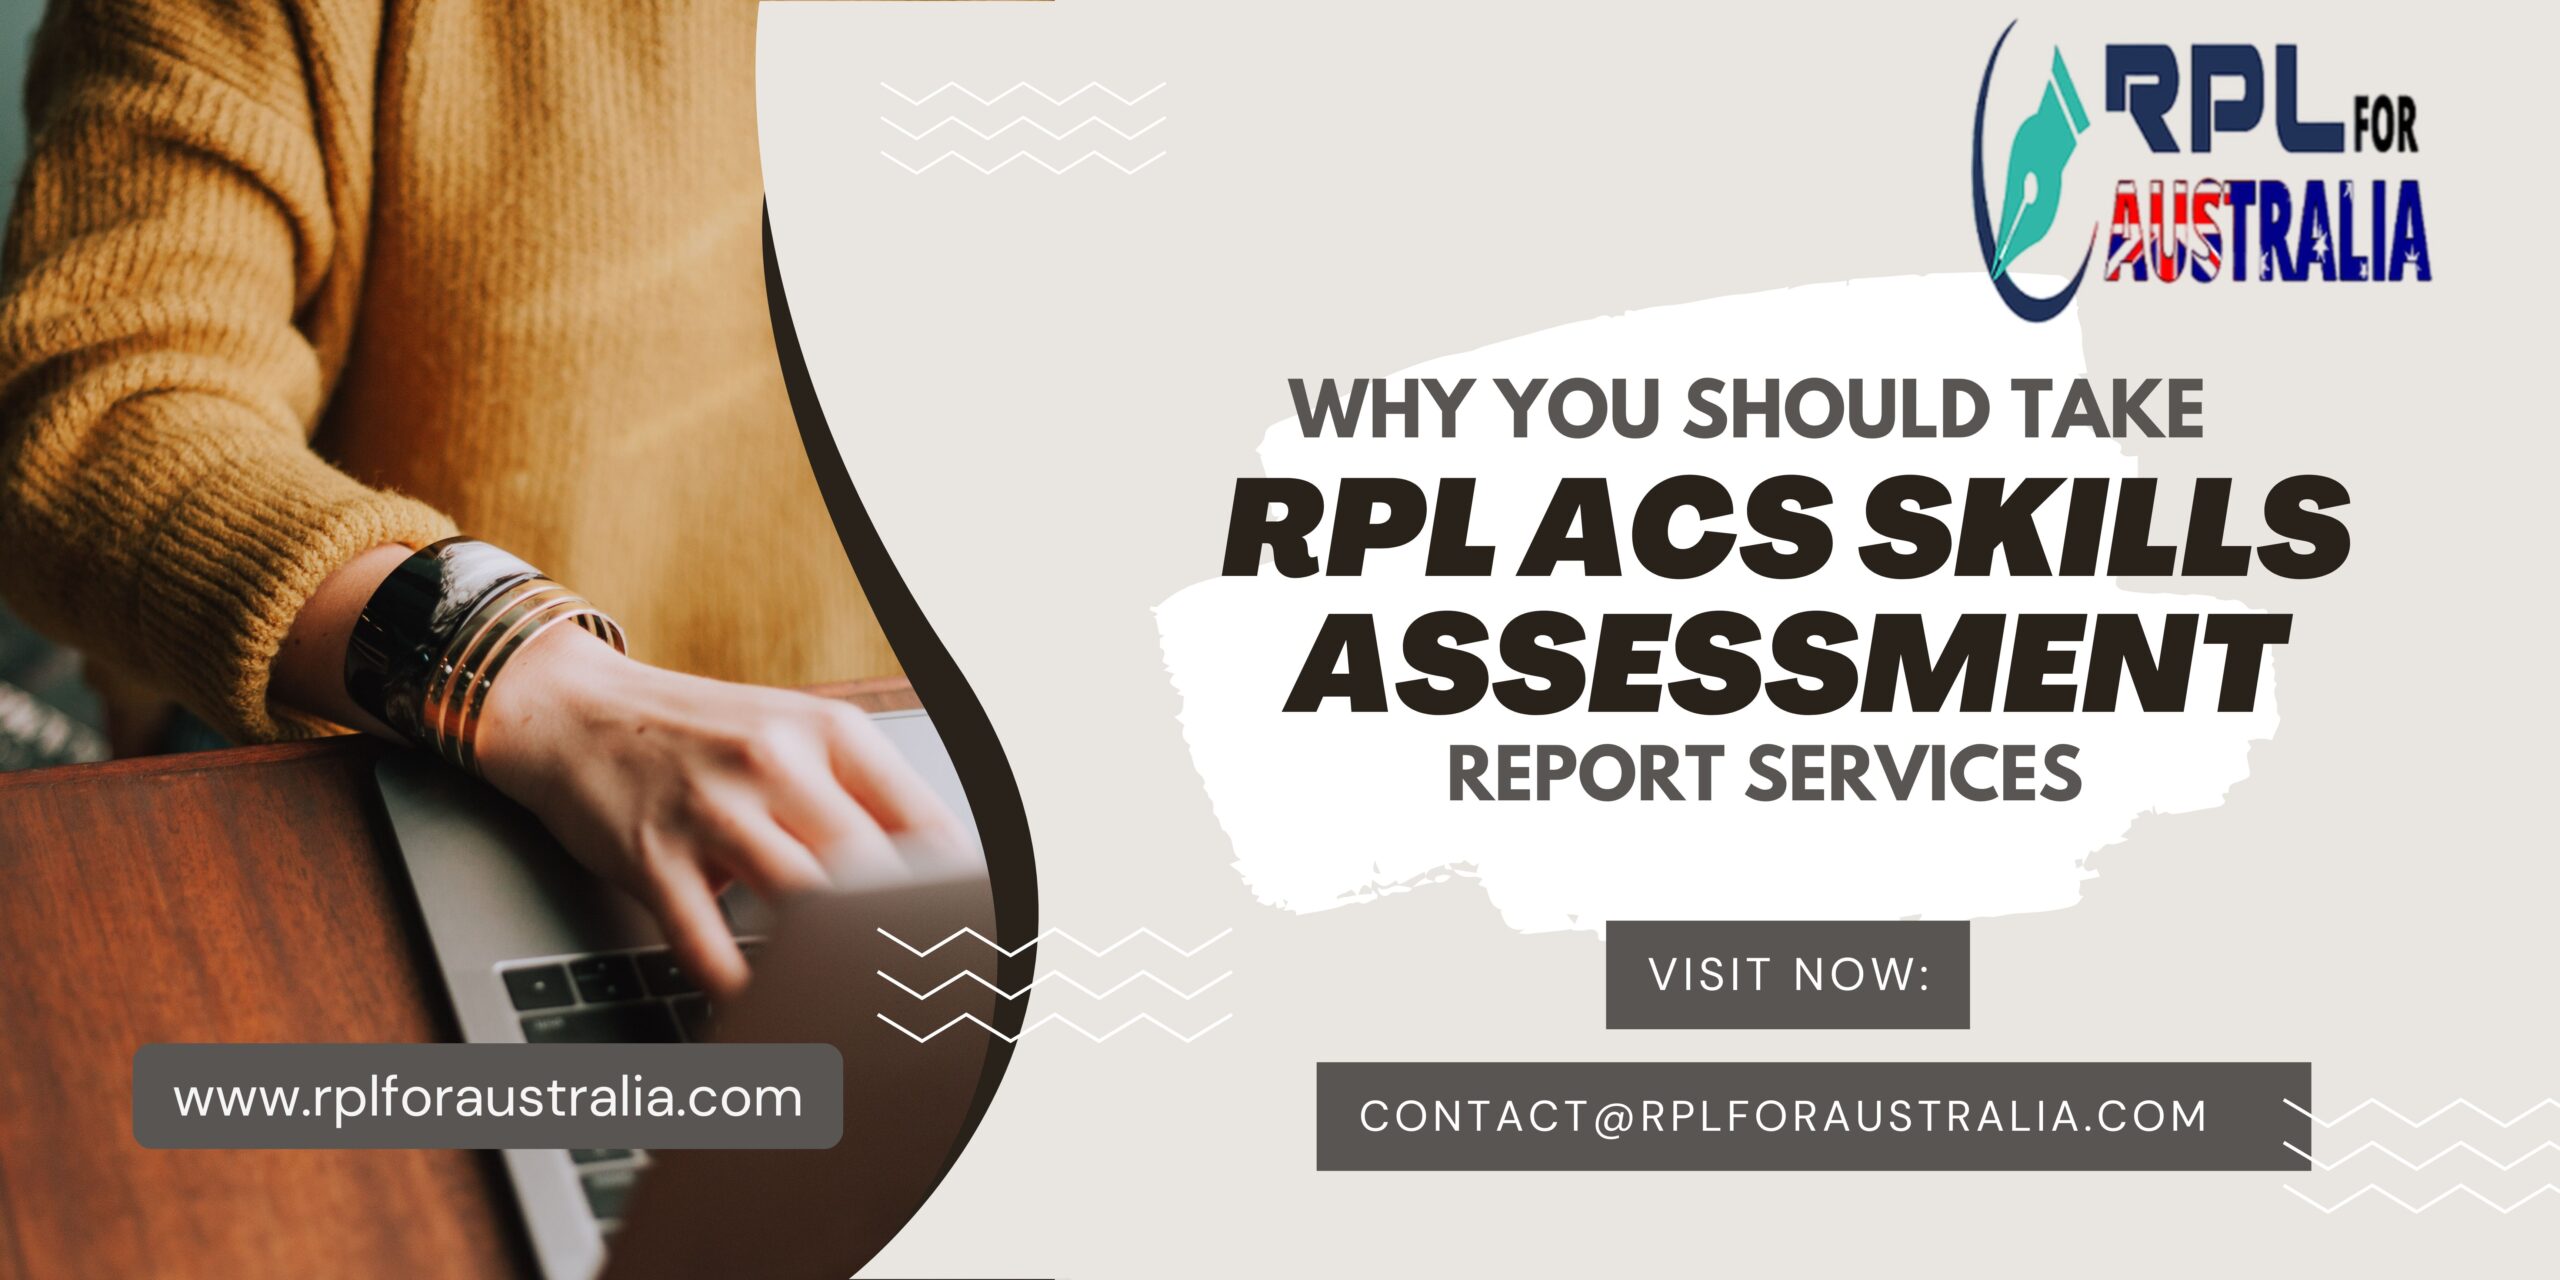 Why You Should Take RPL ACS Skills Assessment Report Services